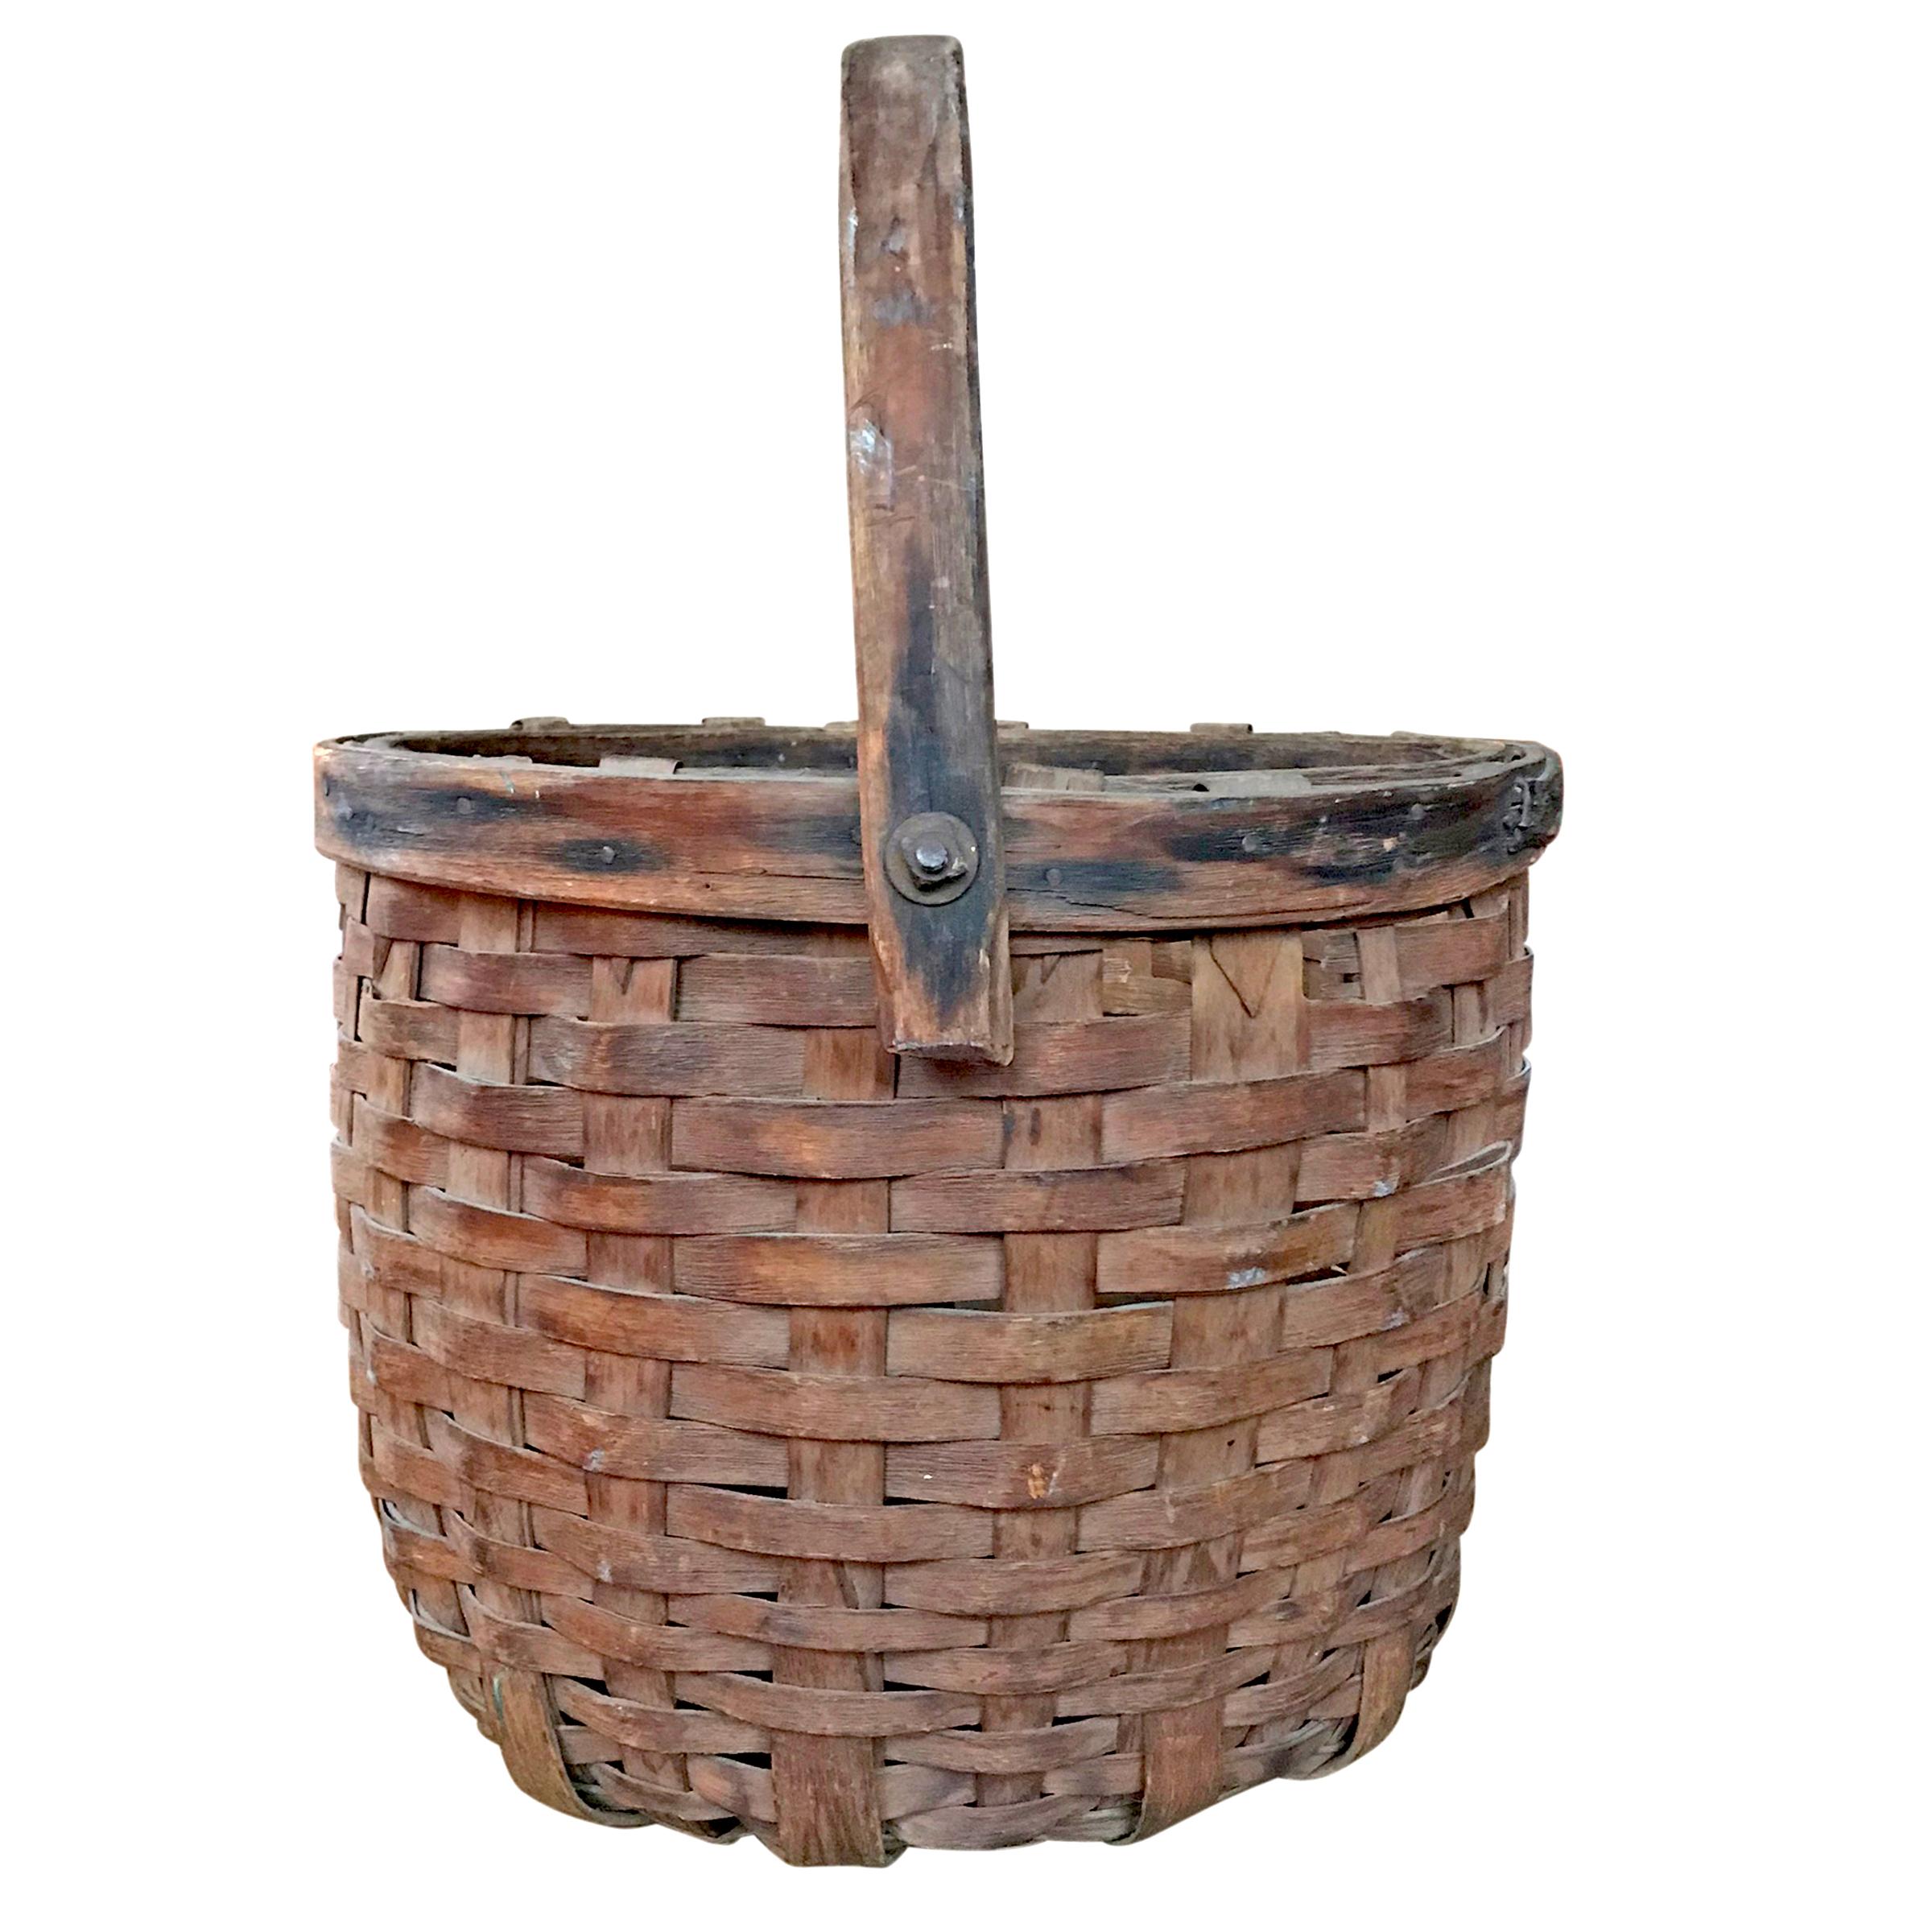 A wonderful early 20th century American handwoven cedar splint gathering basket with a swivel handle attached with bolts, and a heavy double band rim. Found in Wisconsin.